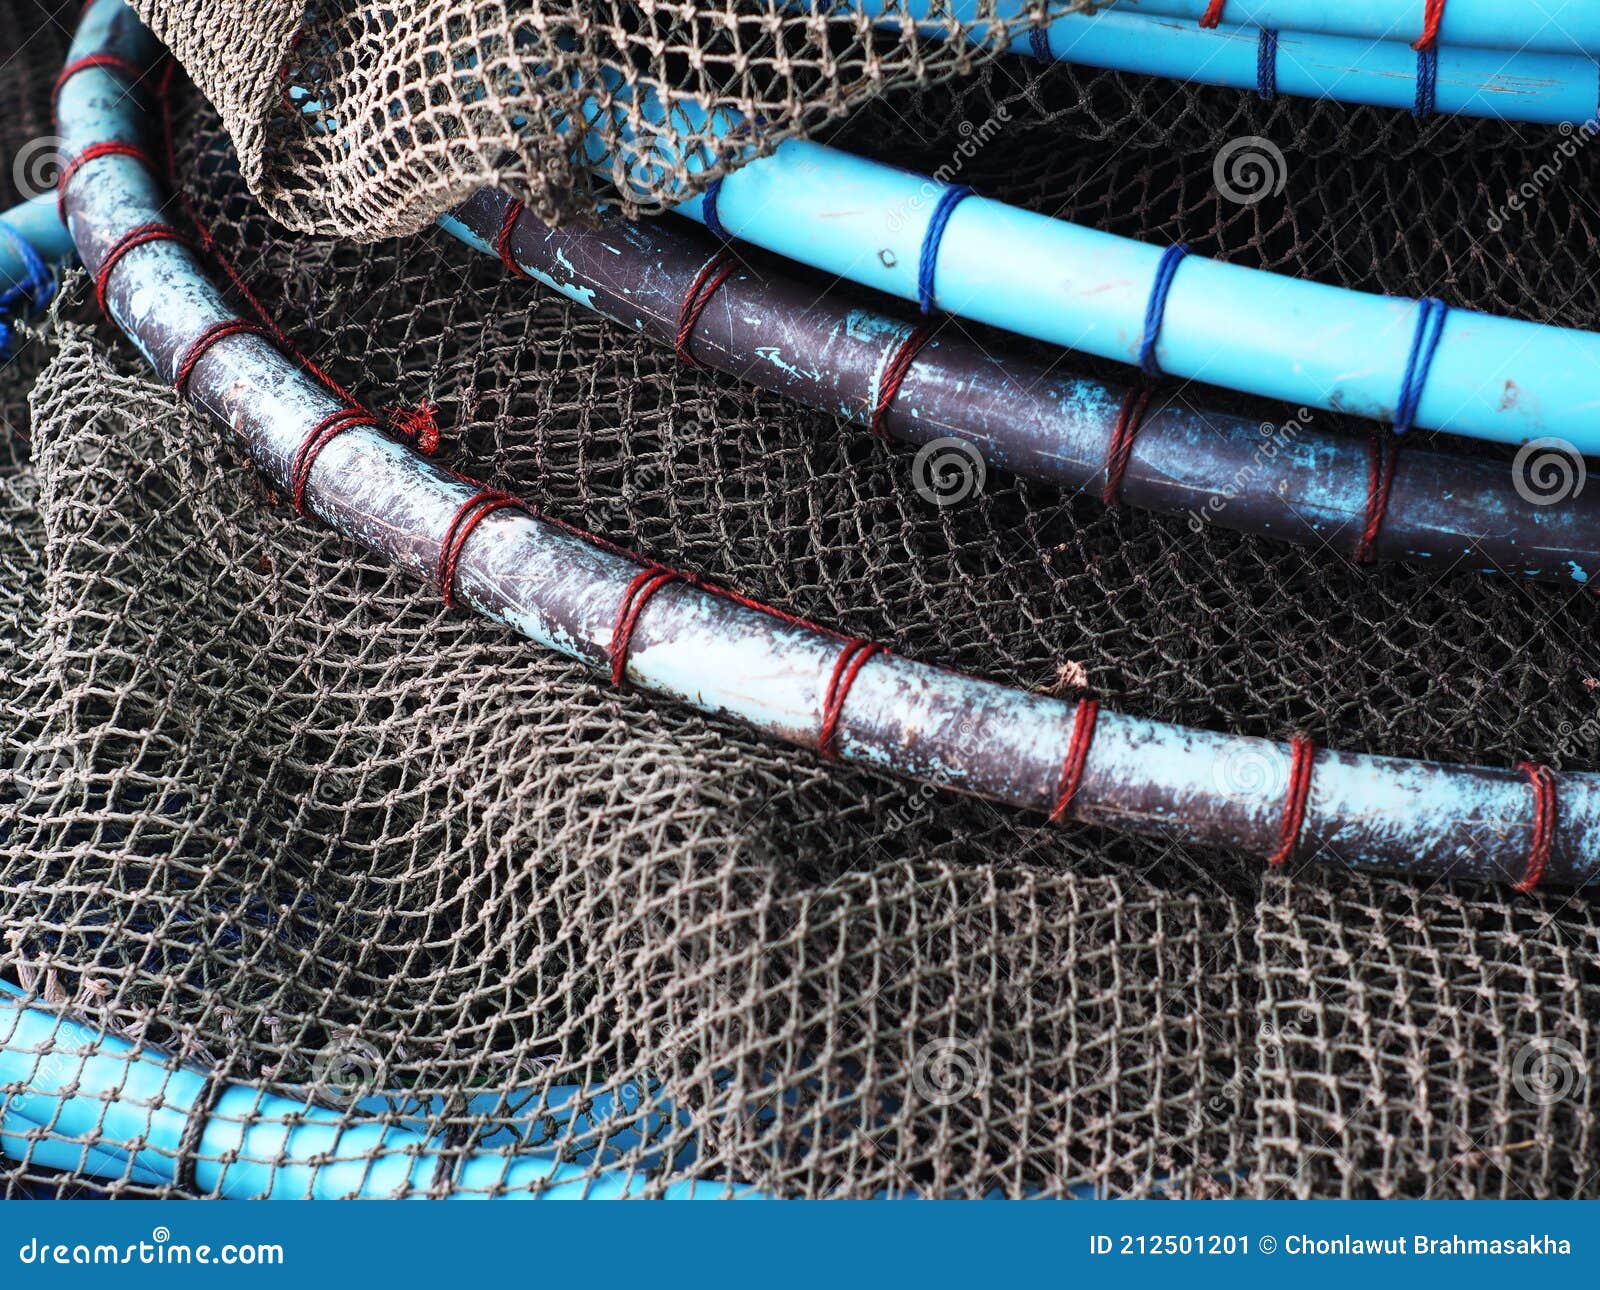 Fishing Fish Net Catcher Made of Dark Blue Green Rope and Blue PVC Pipes  Leaving To Dry after Use in a Shrimp Farm in Thailand Stock Image - Image  of netting, blue